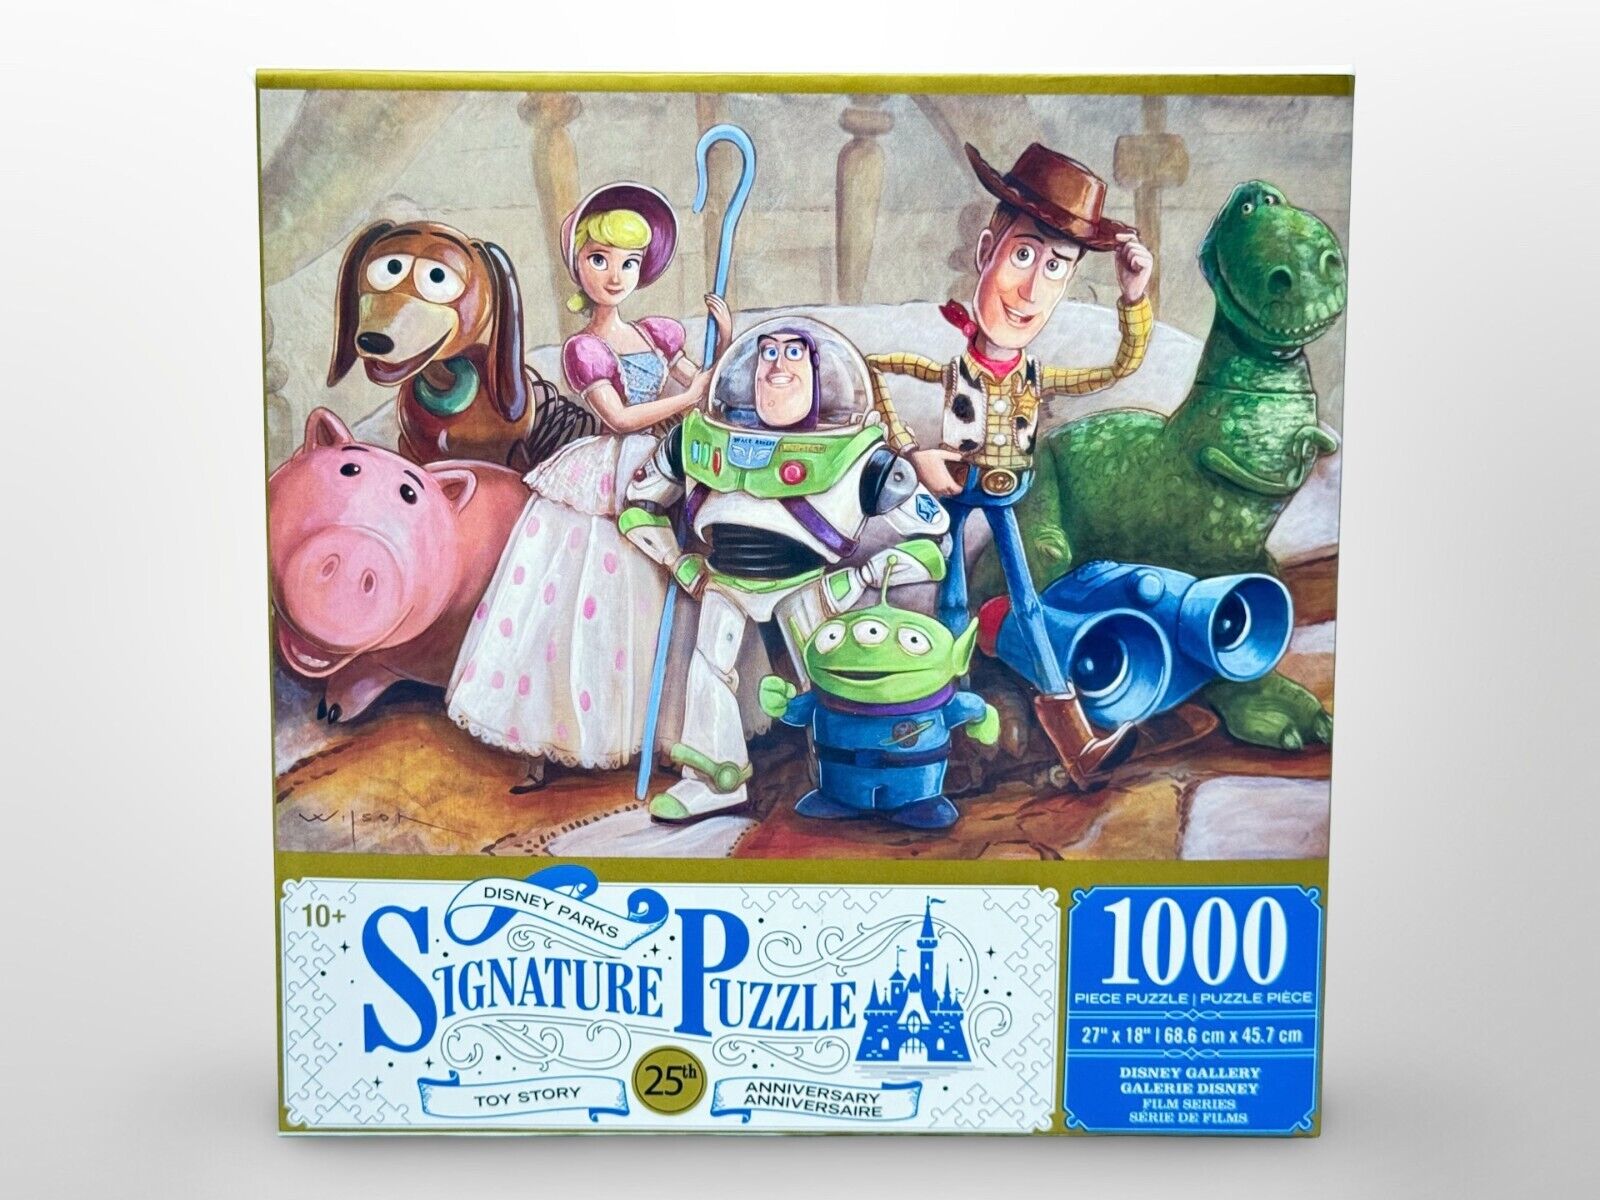 Disney Parks Signature Puzzle Toy Story 25th Anniversary 1000 Pieces Woody Buzz